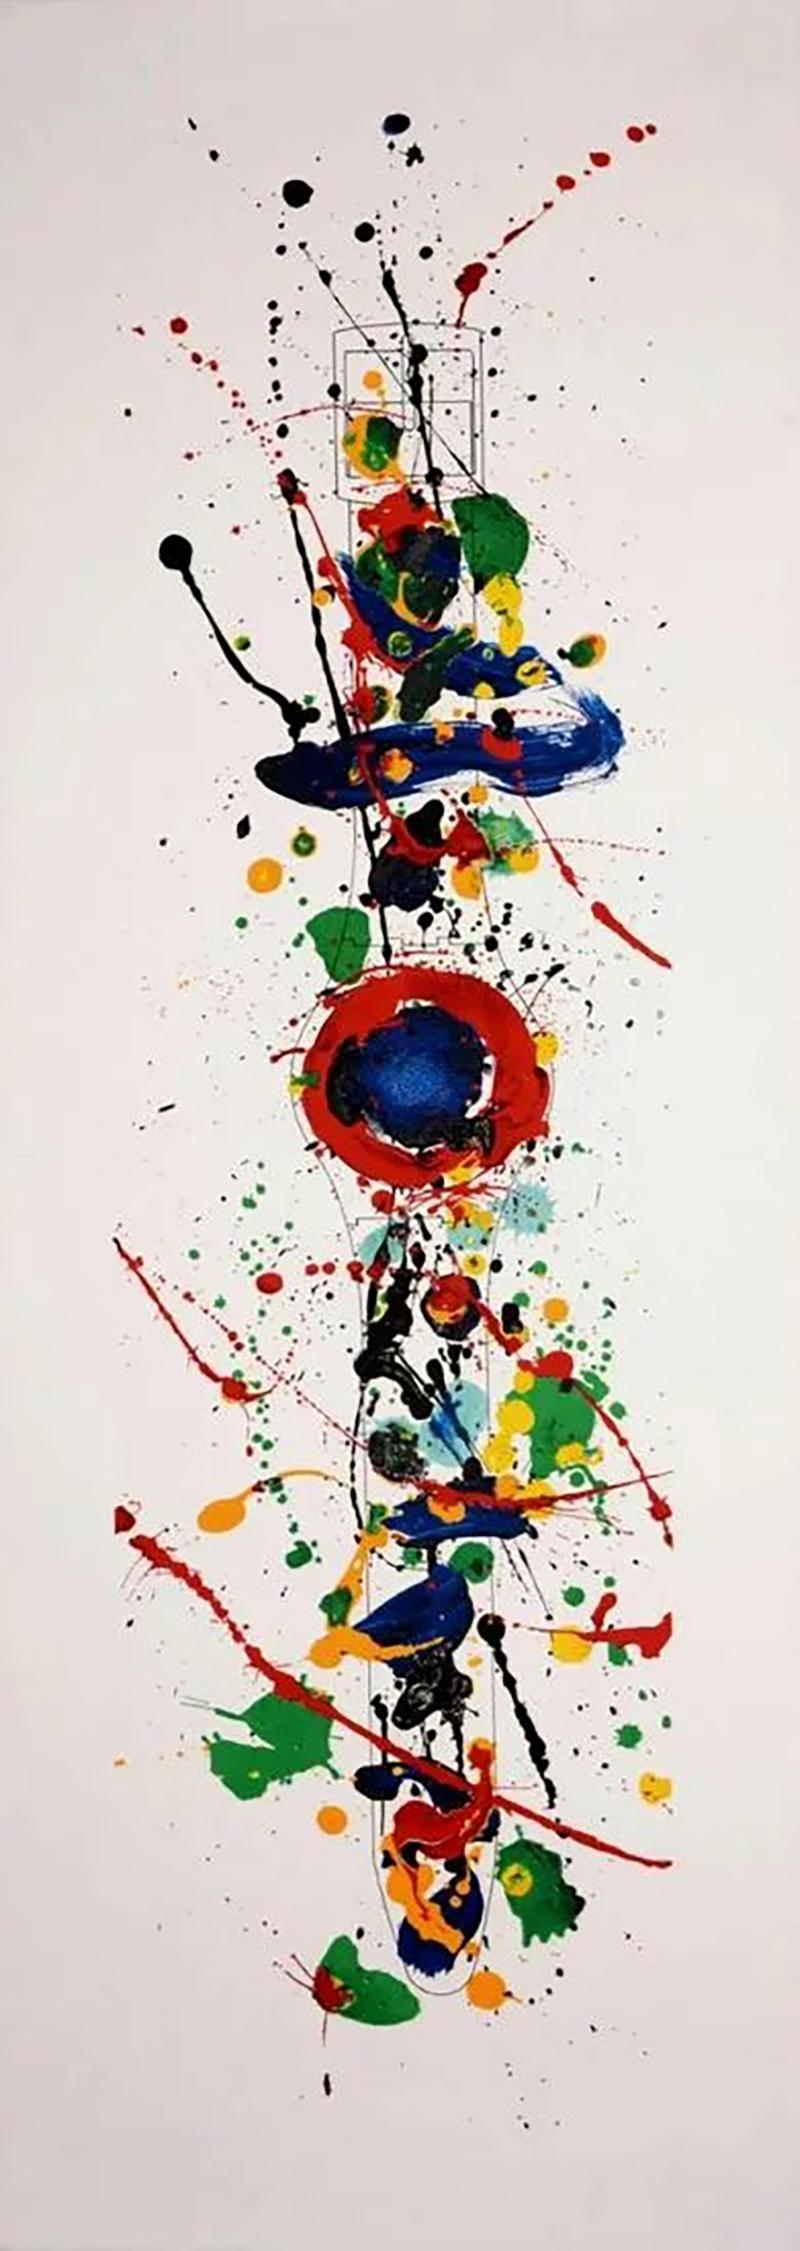 Sam Francis, Swatch Lithograph, 1992